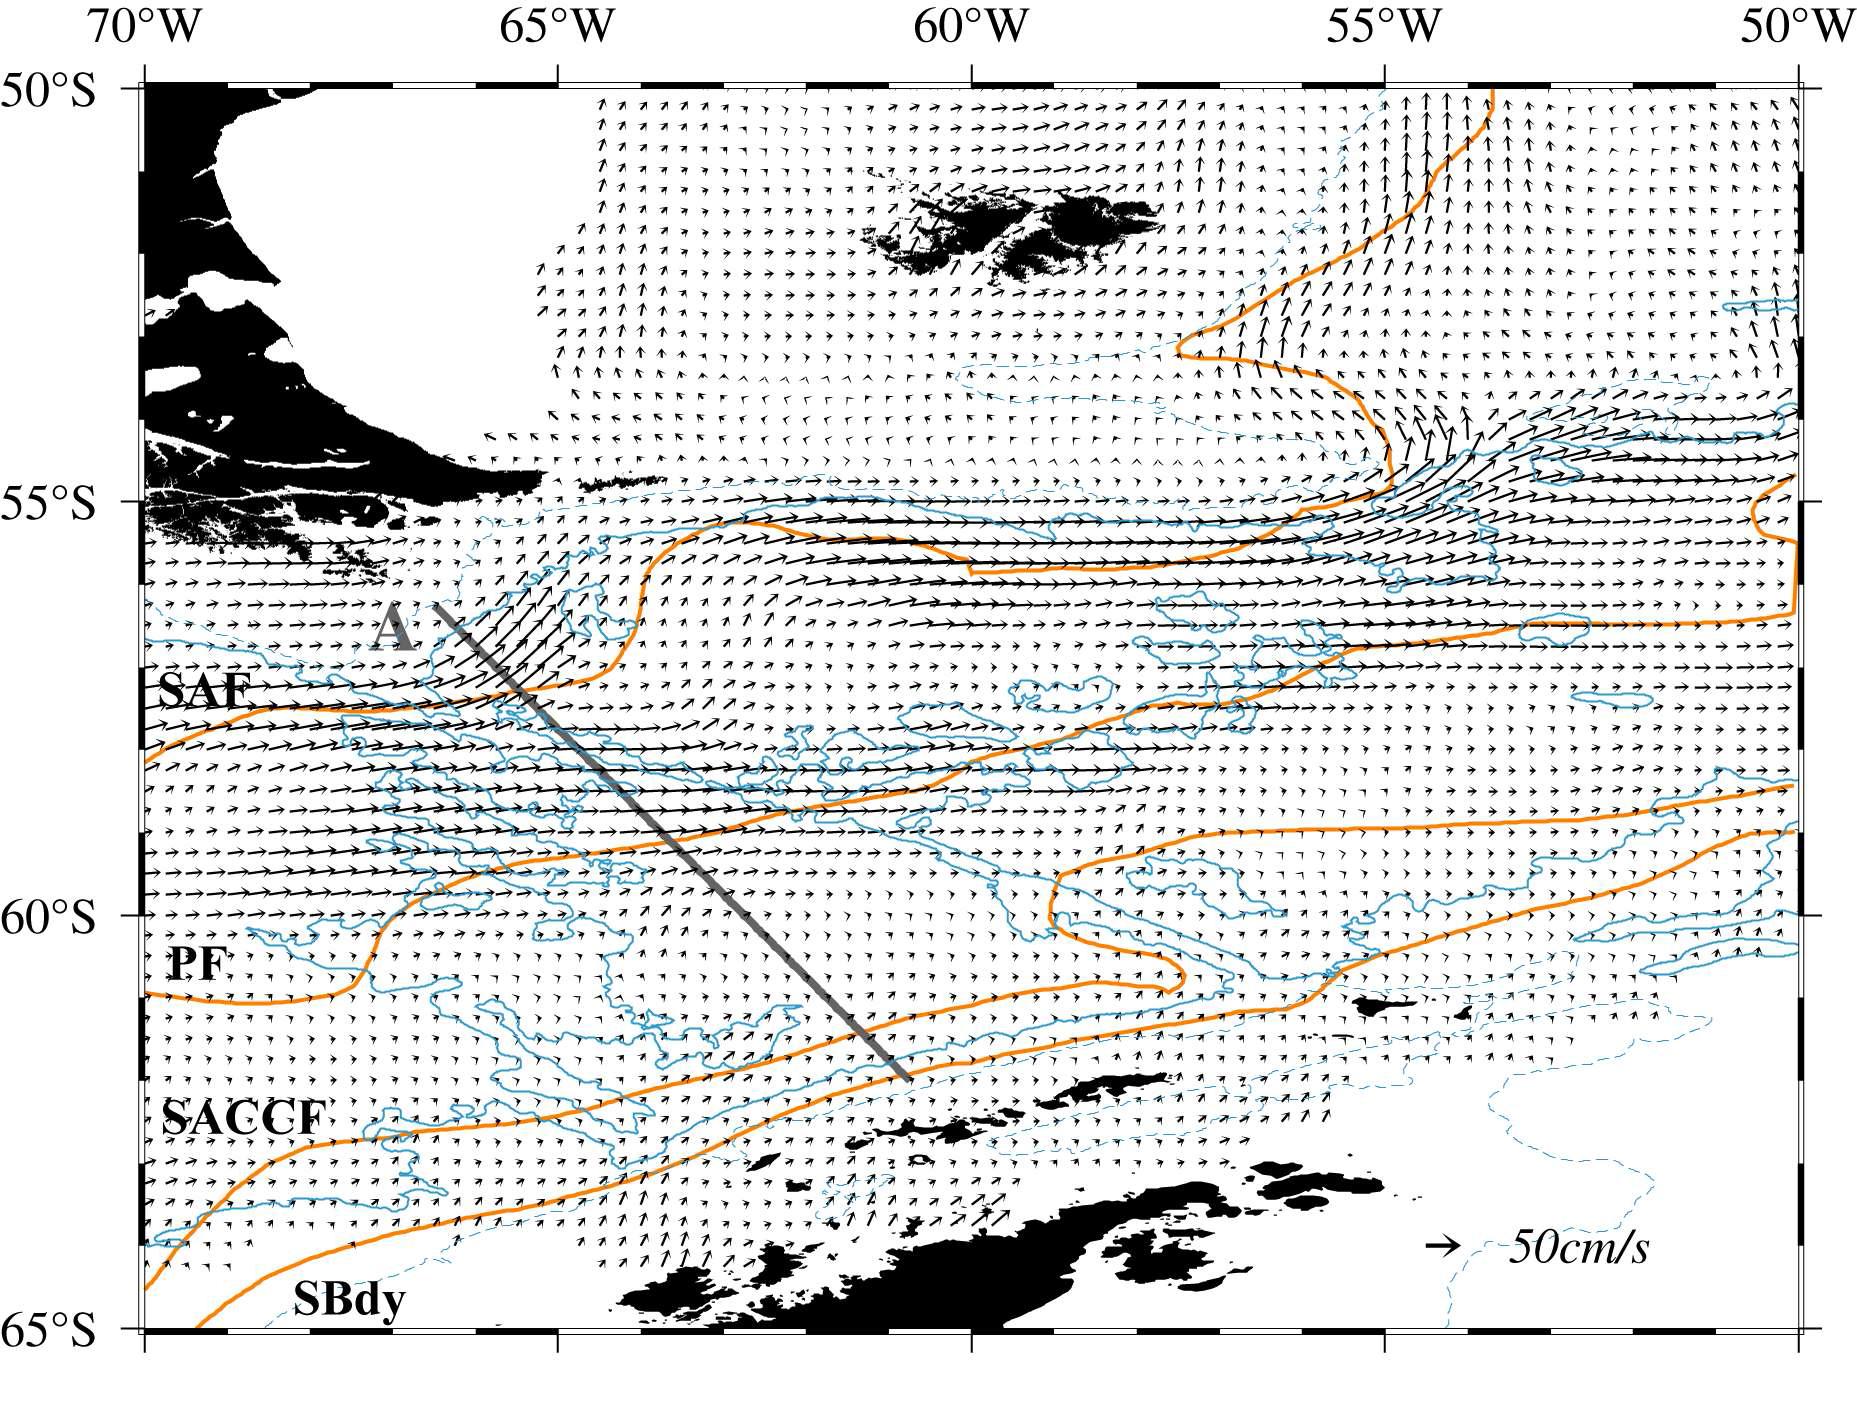 Mean surface velocity field estimated from satellite altimetry. Fronts and bathymetry contour are presented by orange and blue lines, respectively. Section A to compute transport is marked by thick straight lines.